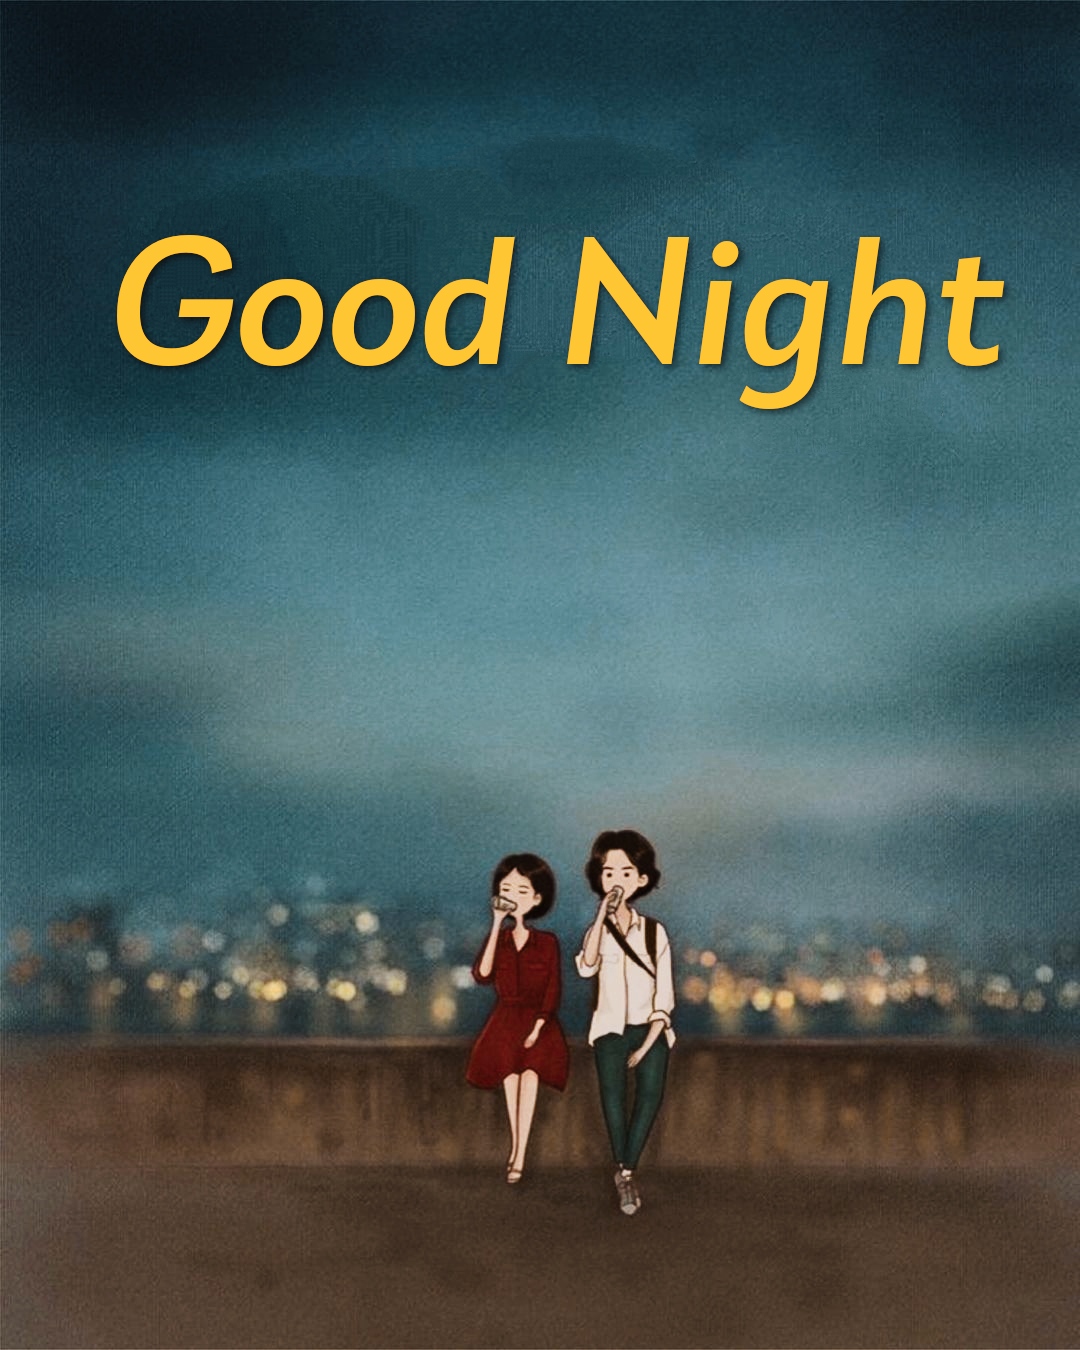 New Good Night Love Images